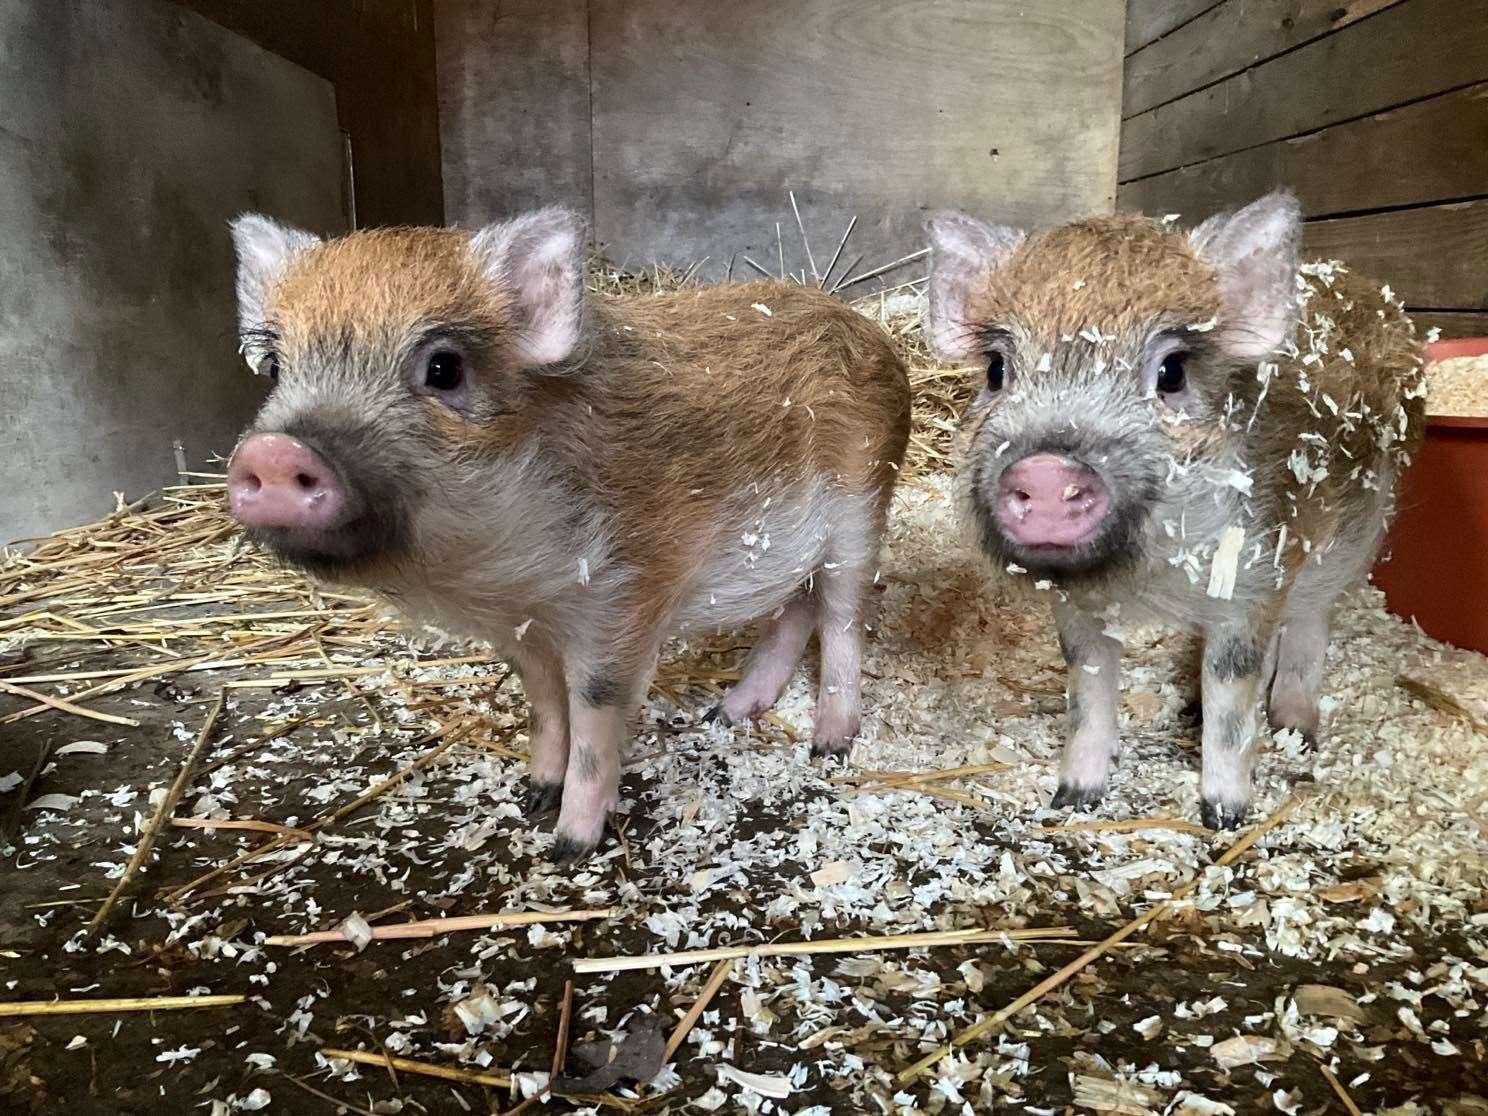 The 2 adorable micro-pigs that were tied to the lamppost. All pictures provided by Margaret Todd